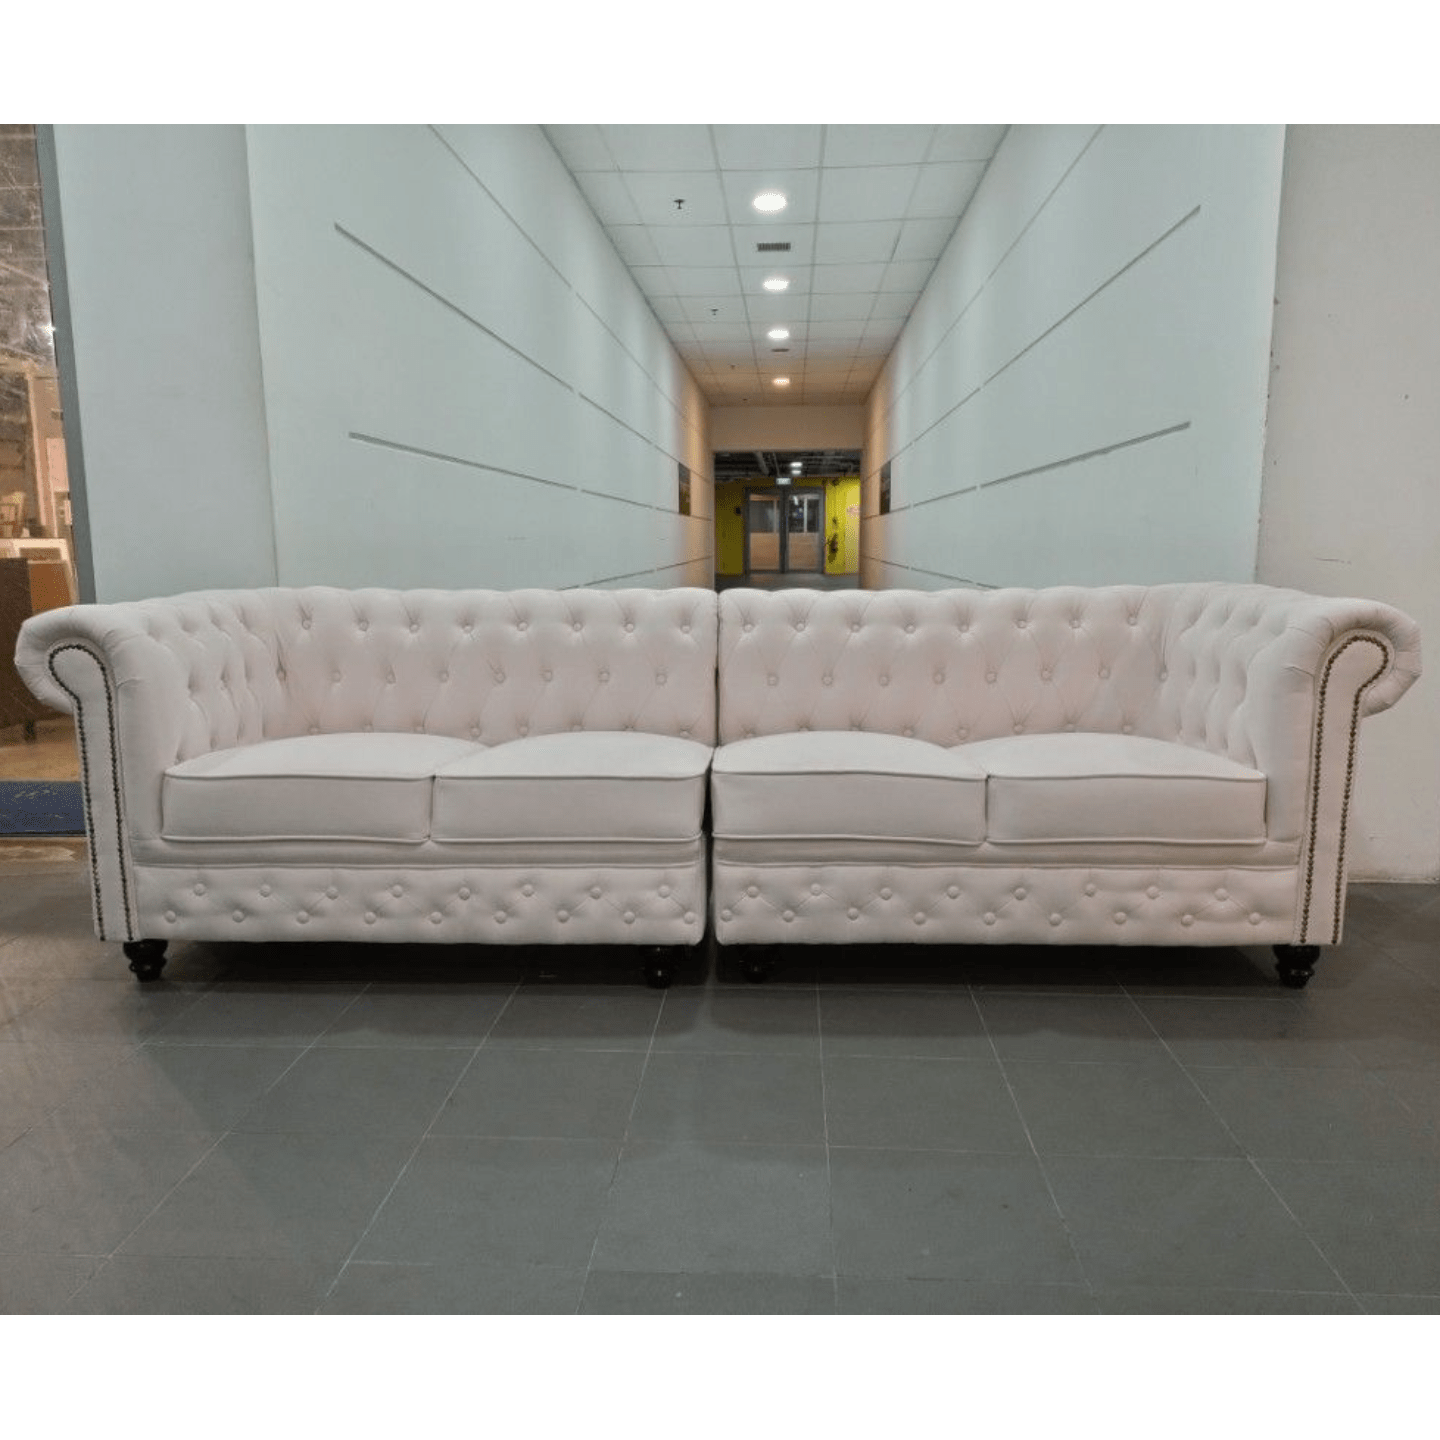 CAT FRIENDLY SALVADORE X 4 Seater Chesterfield Sofa in NUDE PINK TECH VELVET